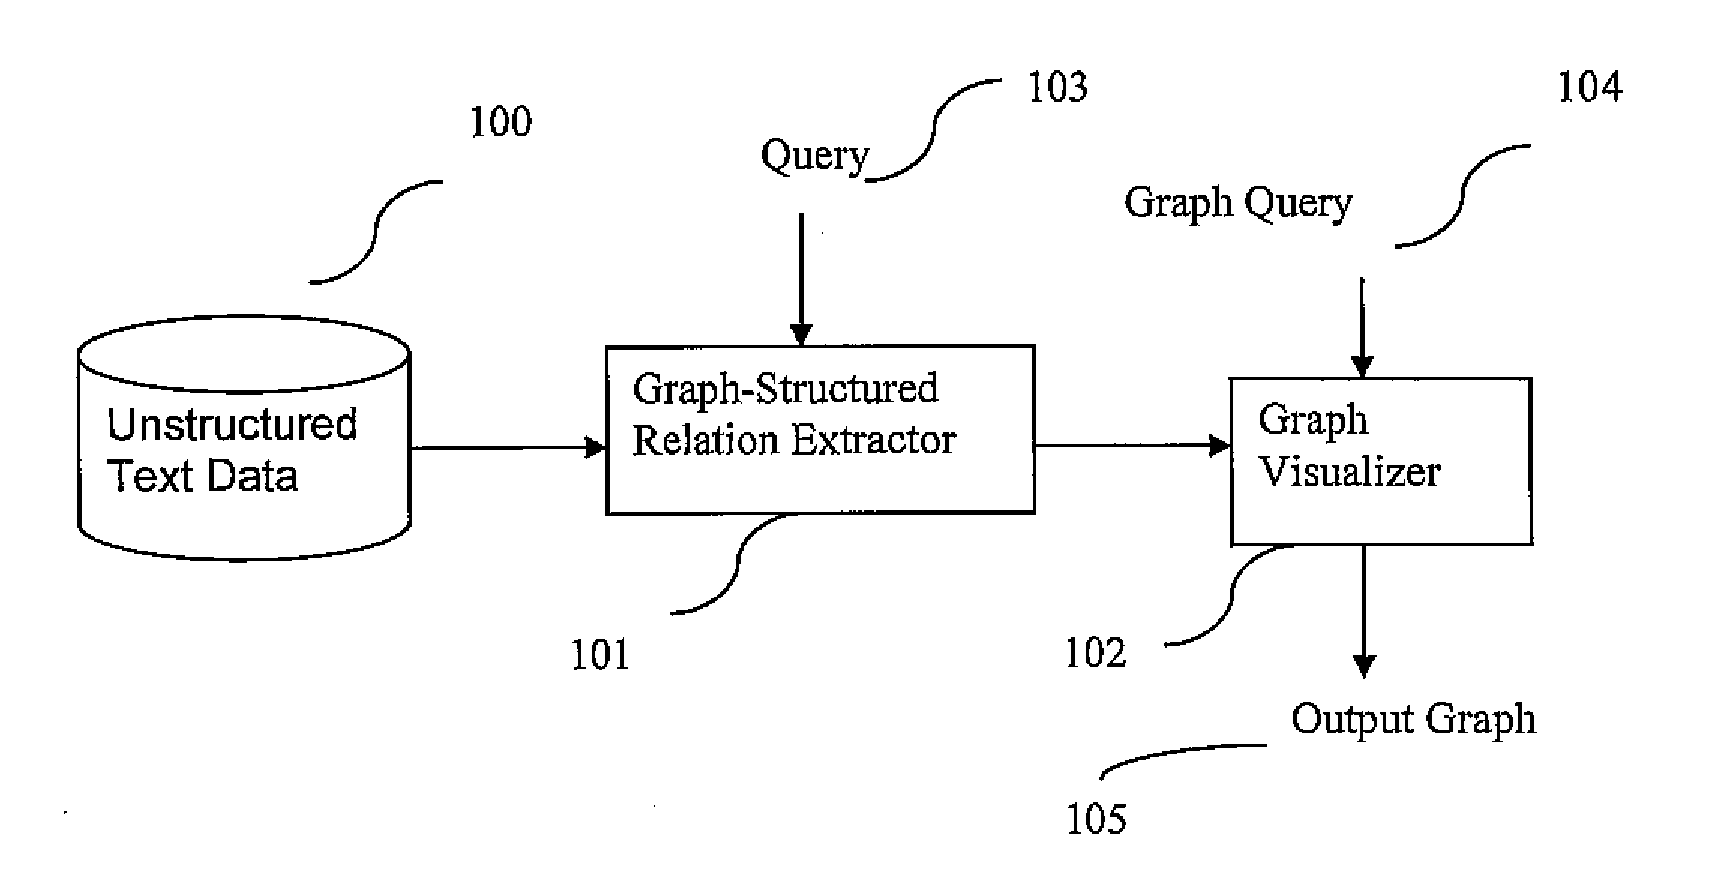 Method and system for extracting and visualizing graph-structured relations from unstructured text